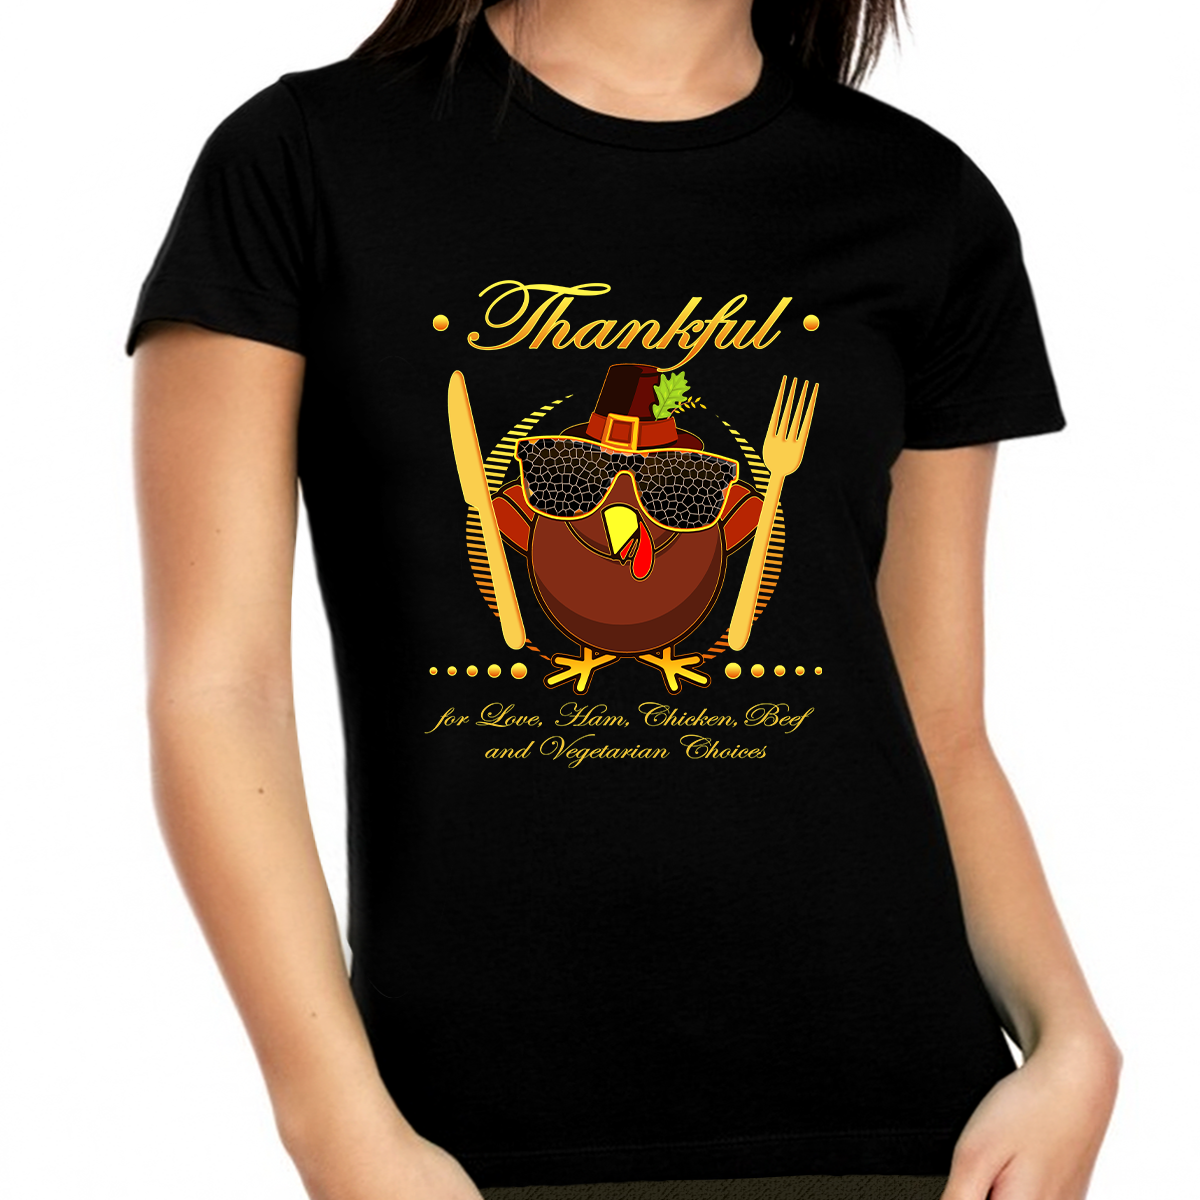 Funny Thanksgiving Shirts for Women Plus Size 1X 2X 3X 4X 5X Plus Size Thankful Shirt for Women Fall Shirts